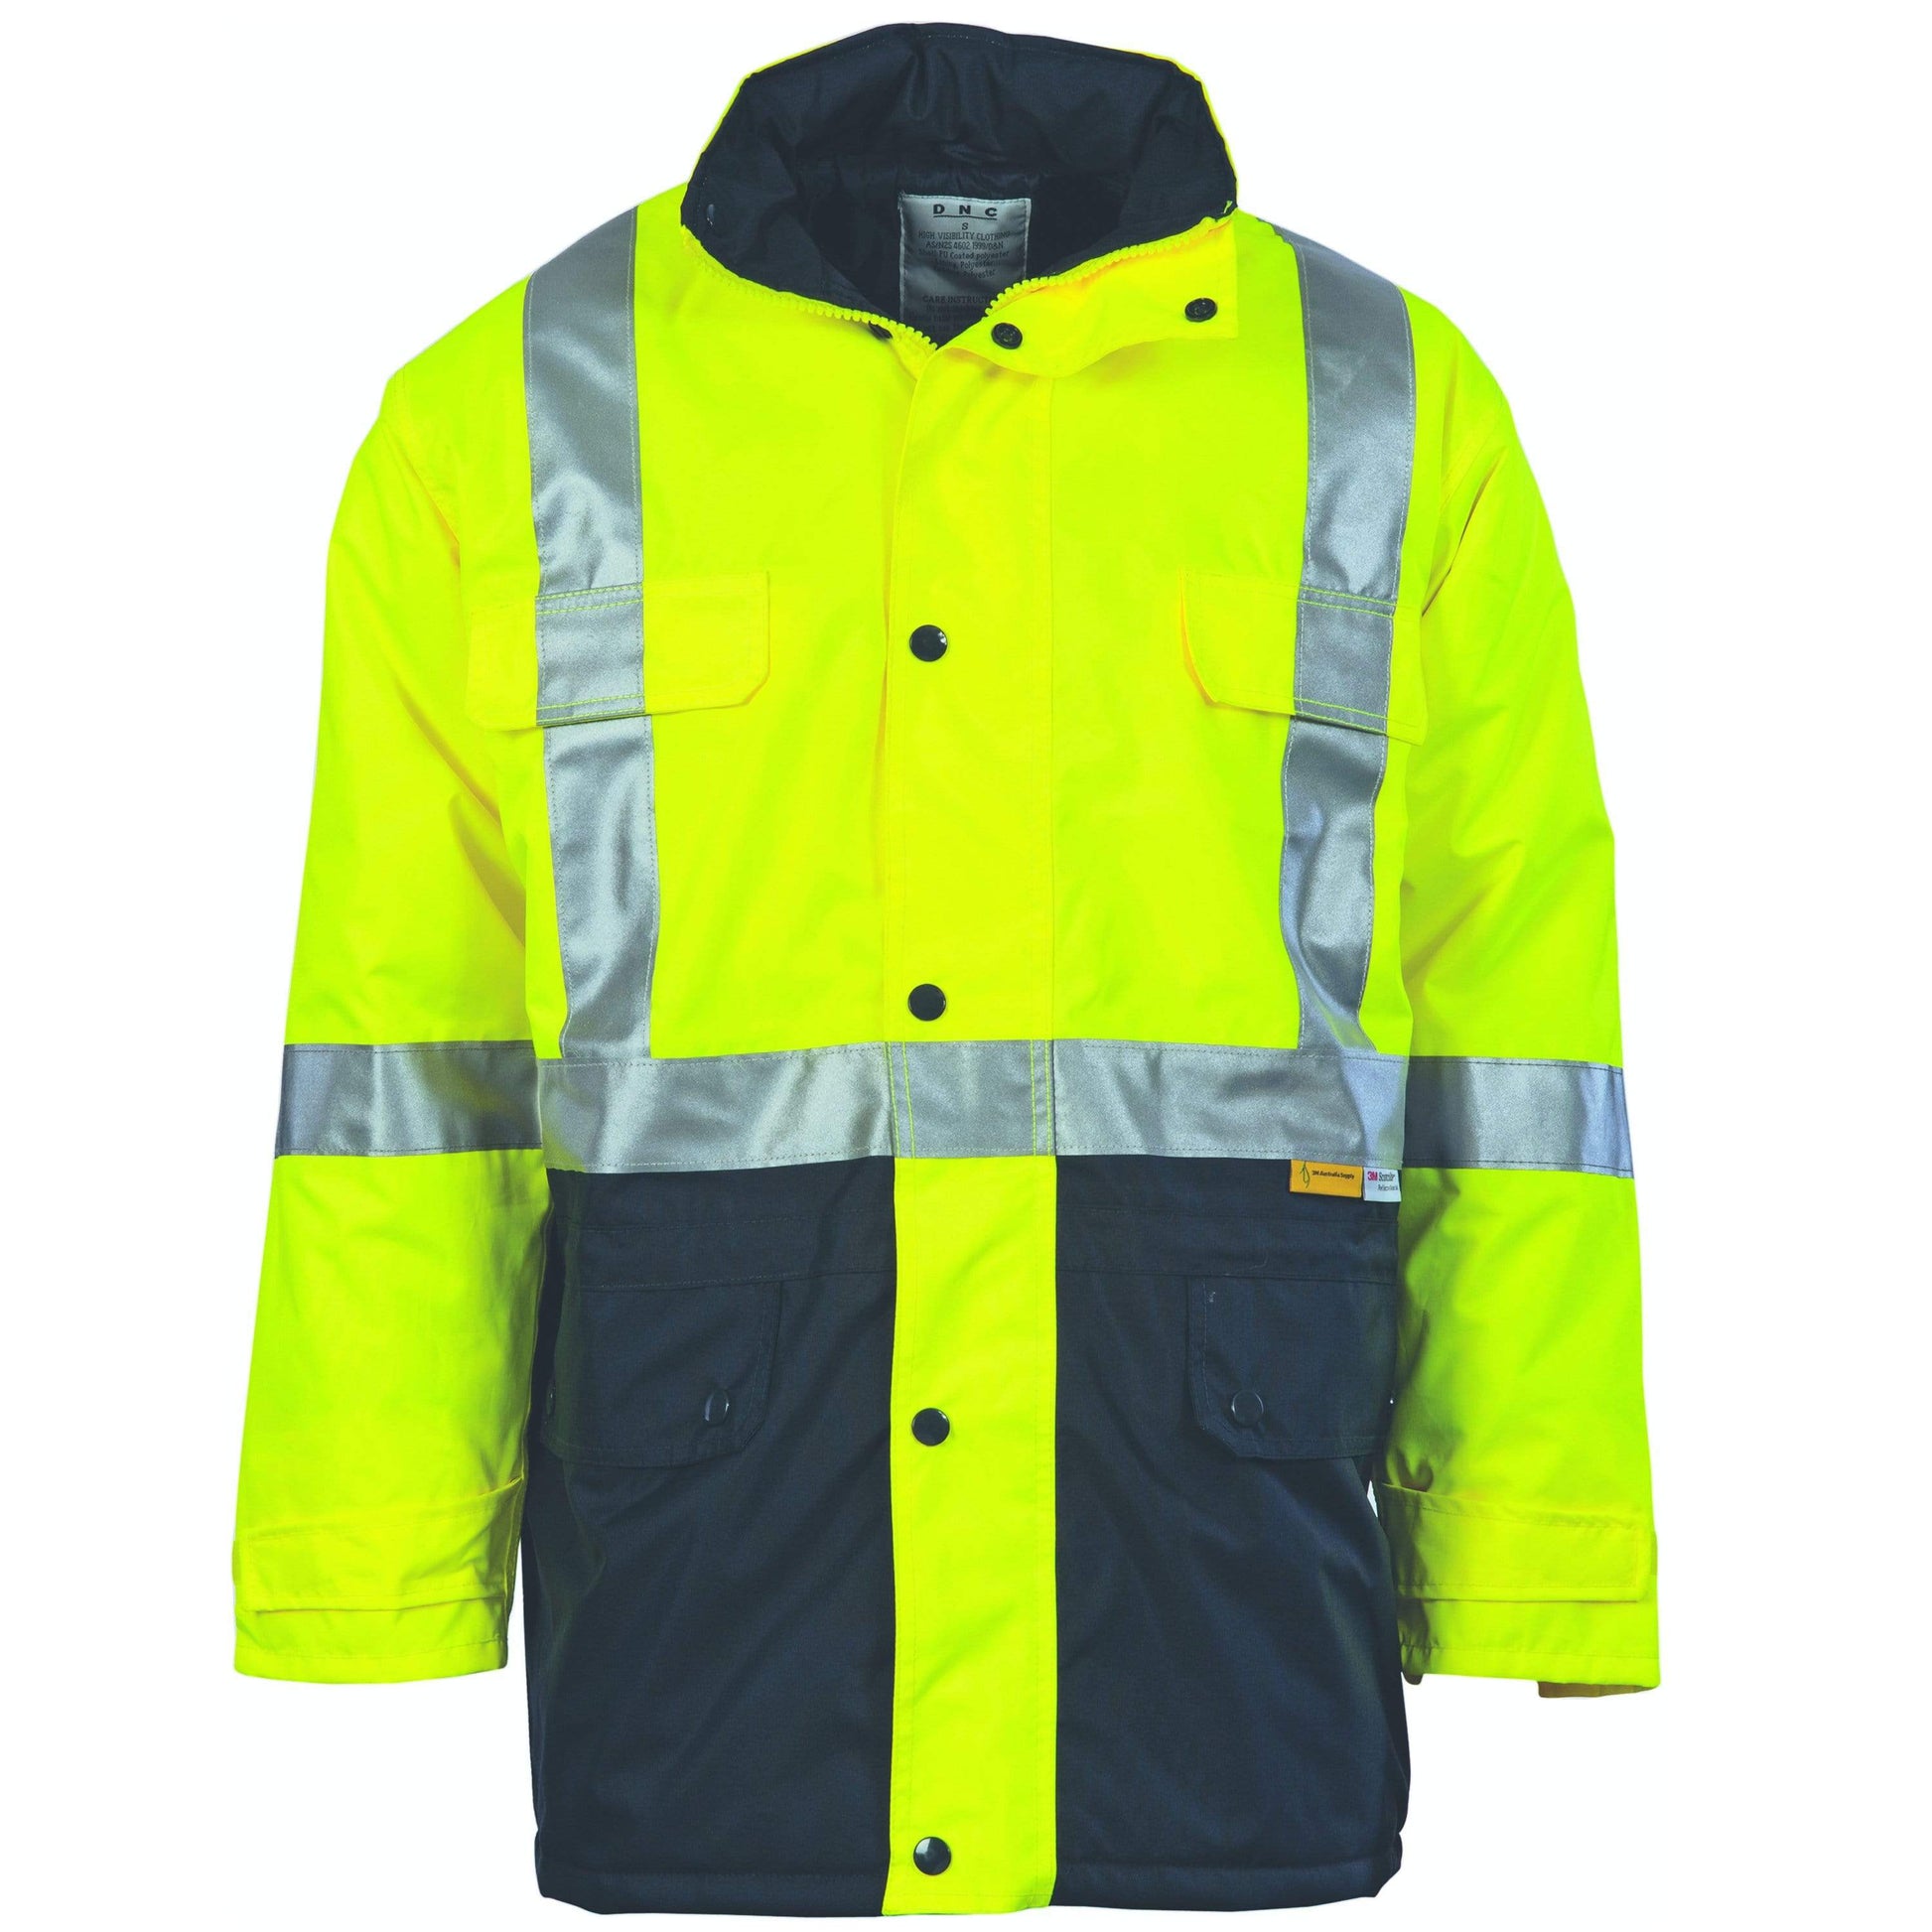 DNC Workwear Work Wear Yellow/Navy / S DNC WORKWEAR Hi-Vis Two-Tone Quilted Jacket with 3M Reflective Tape 3863